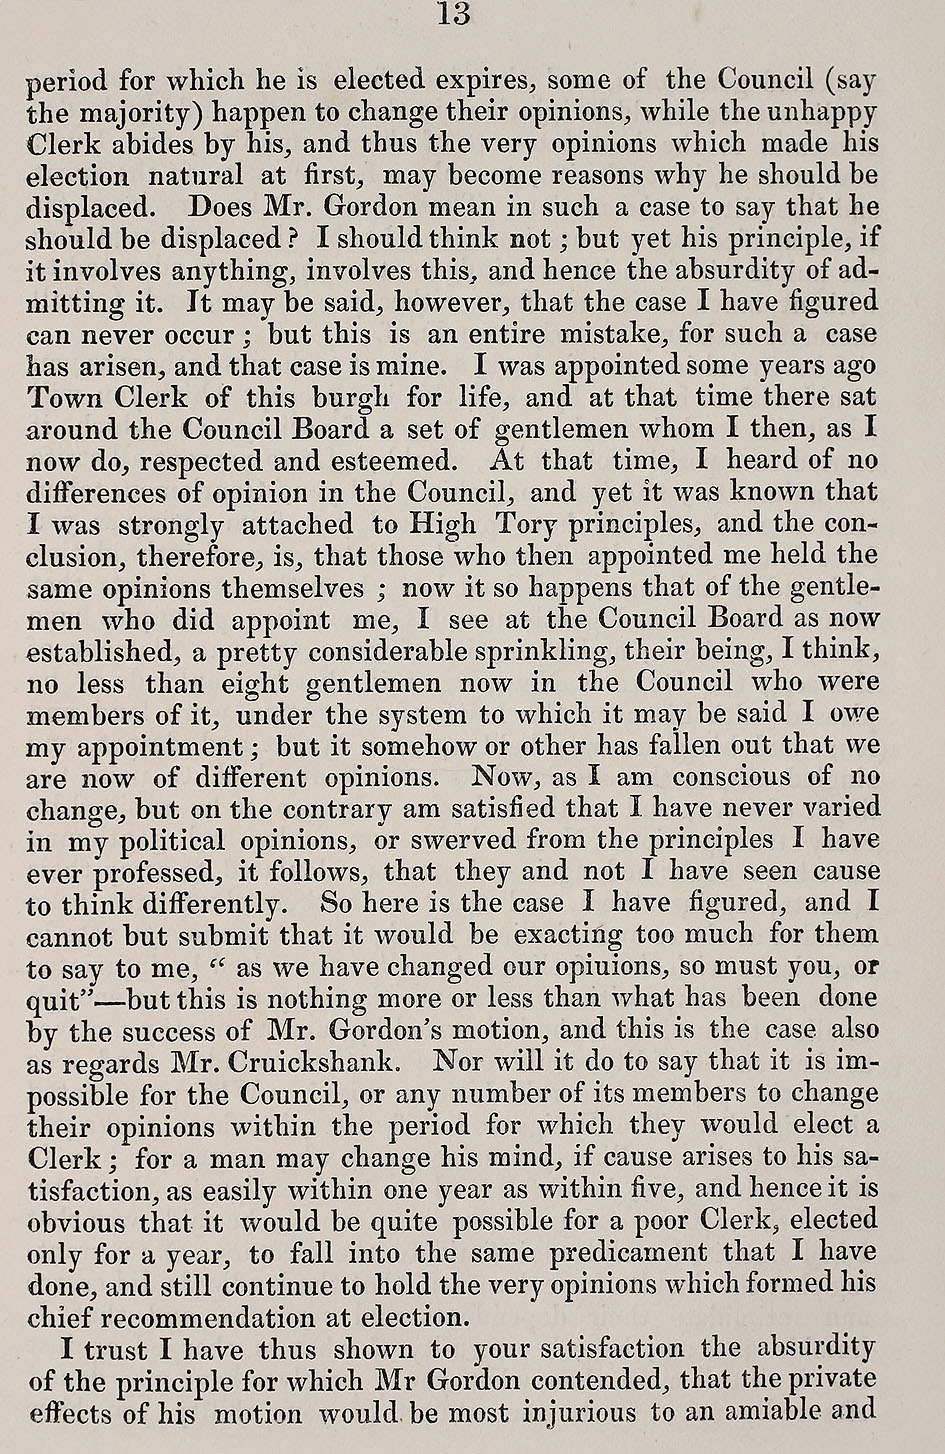 RAD097, Letter from the Town Clerk of Banff to the Provost, Magistrates, and Council of that Burgh